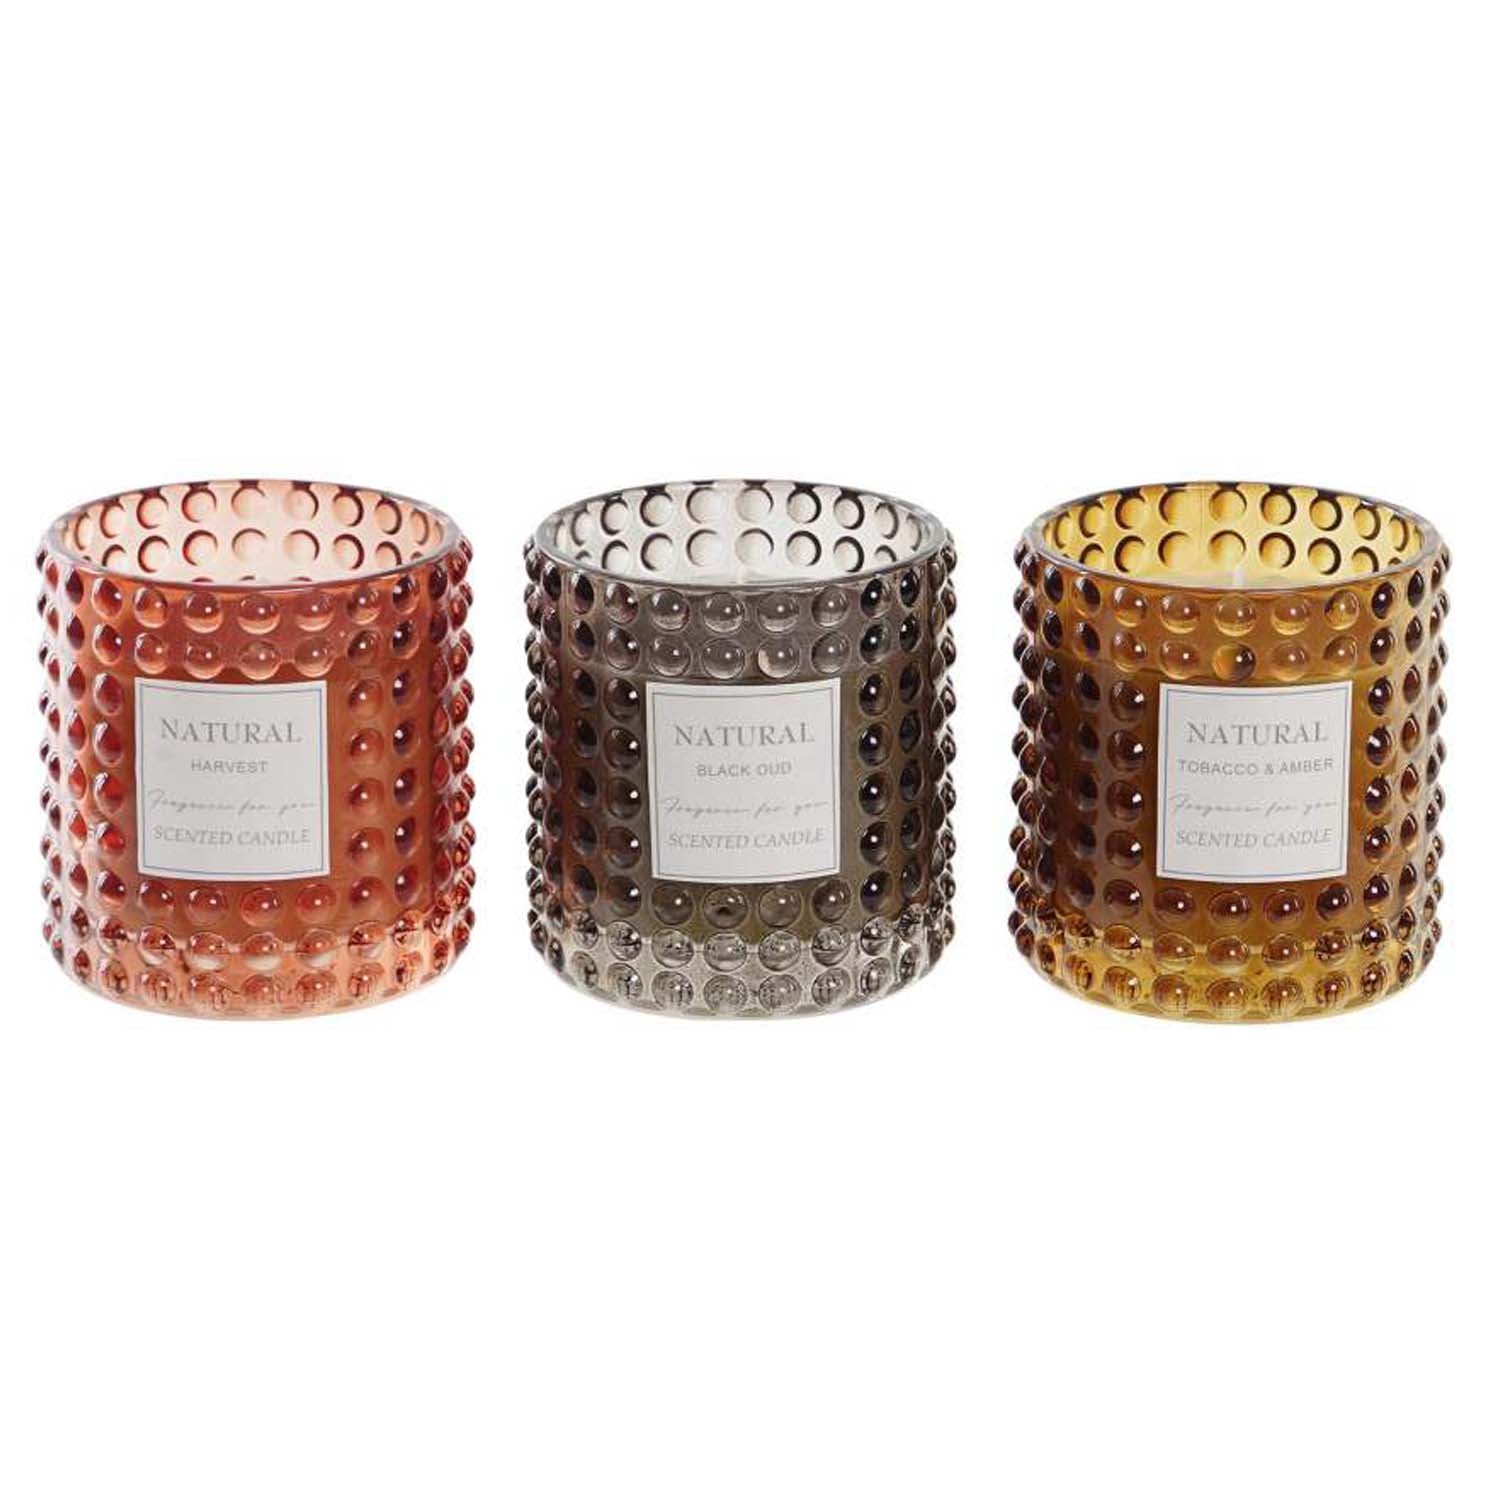 Crystal embossed candles